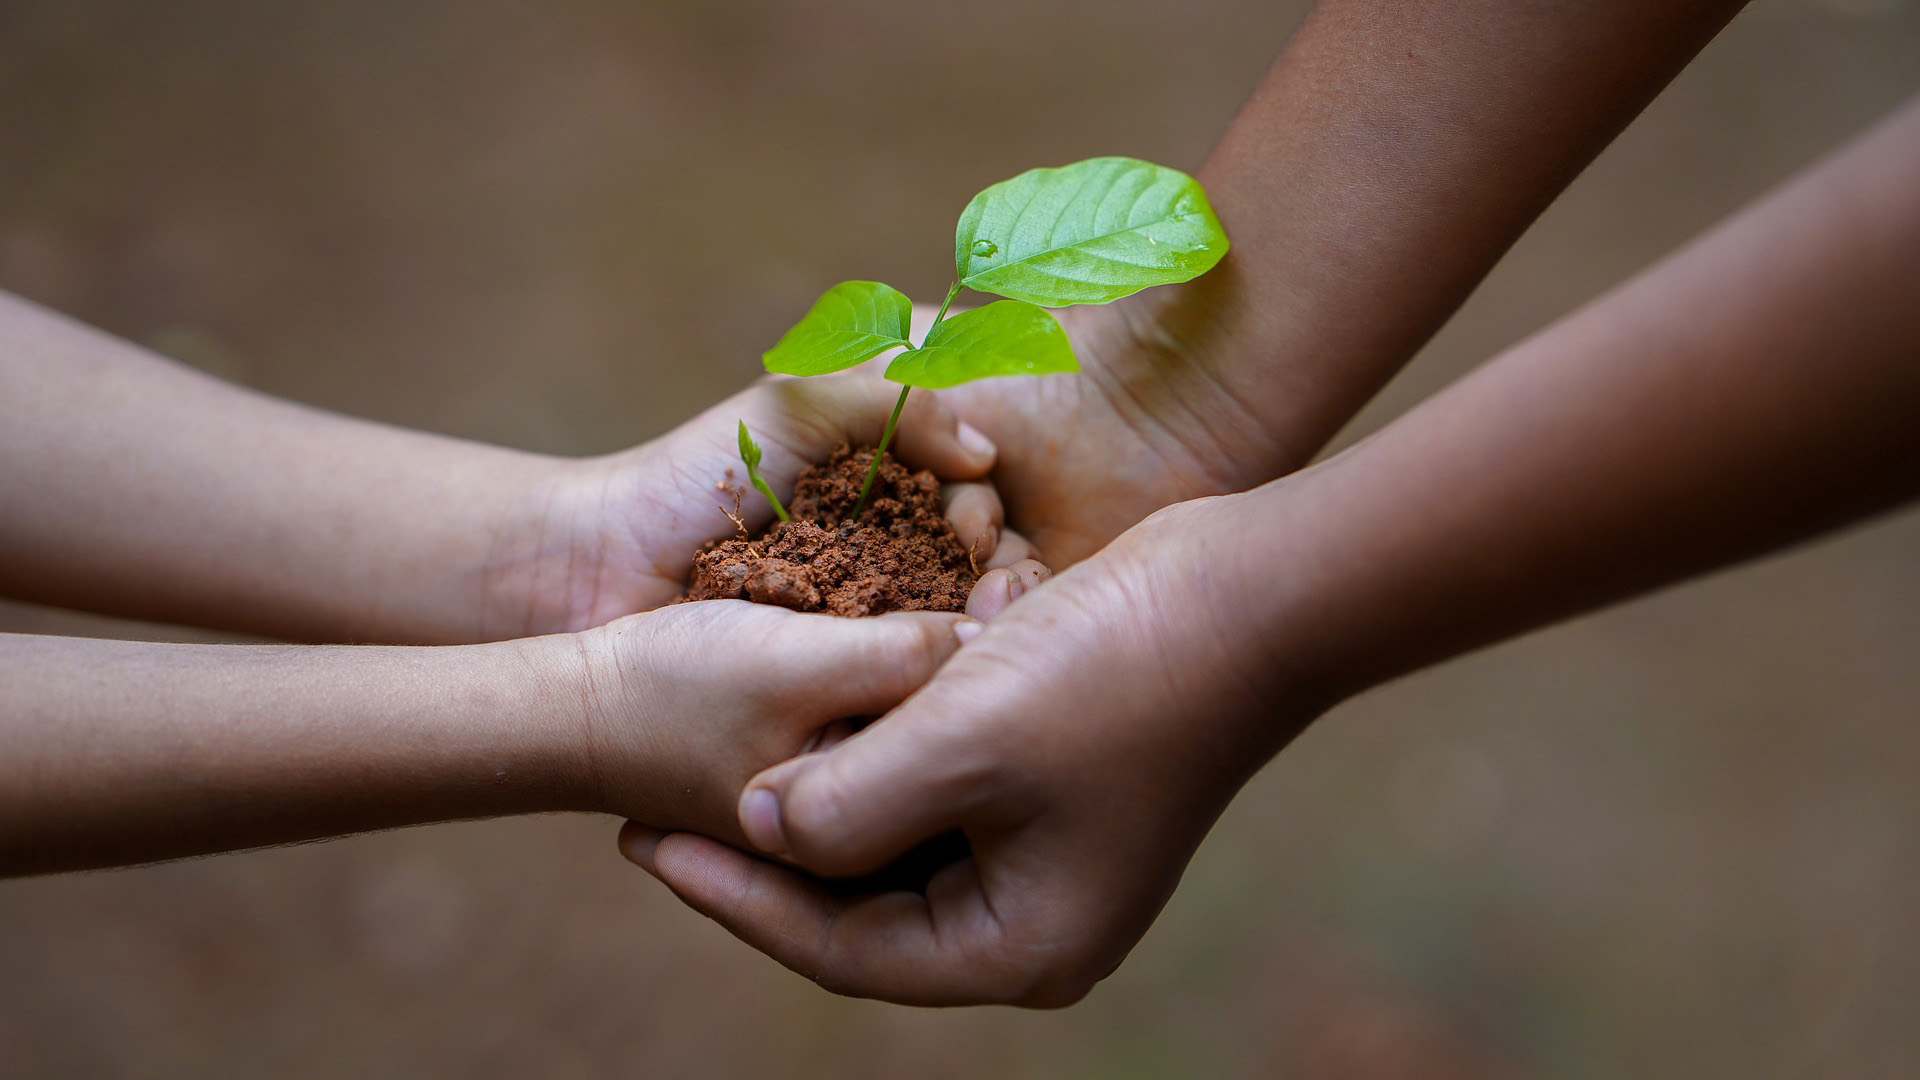 Two different people standing across from one another with their hand cupped one holding dirt and a small little growth of what appears to be the start of a tree. The other hand on the right of the graphic is cupping their hands and appears to be receiving the new growth.